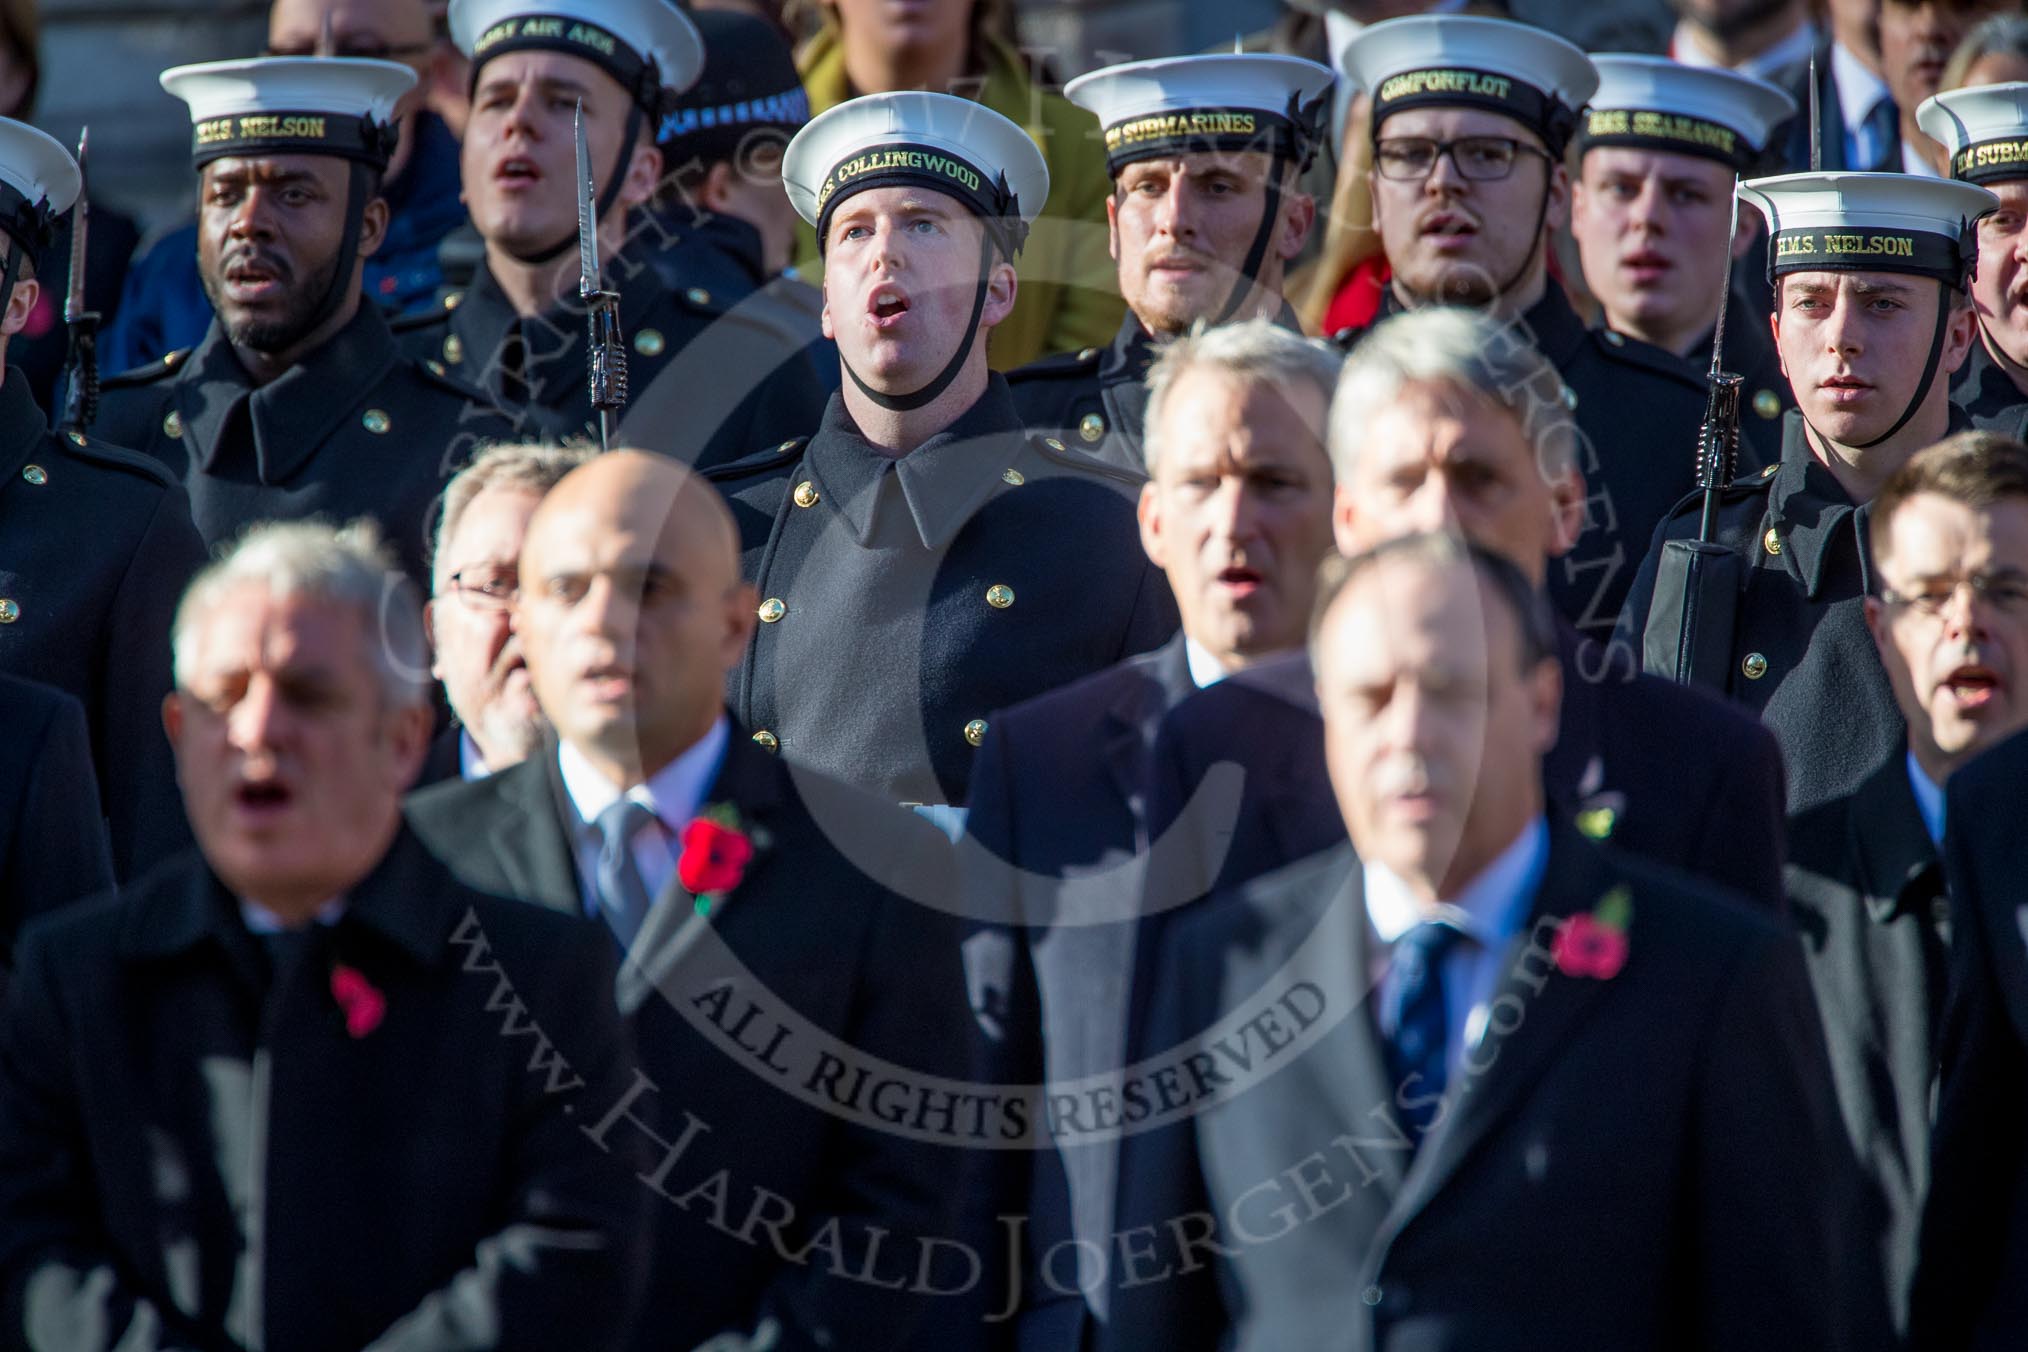 Members of the Service detachment from the Royal Navy singing during the Remembrance Sunday Cenotaph Ceremony 2018 at Horse Guards Parade, Westminster, London, 11 November 2018, 11:22.